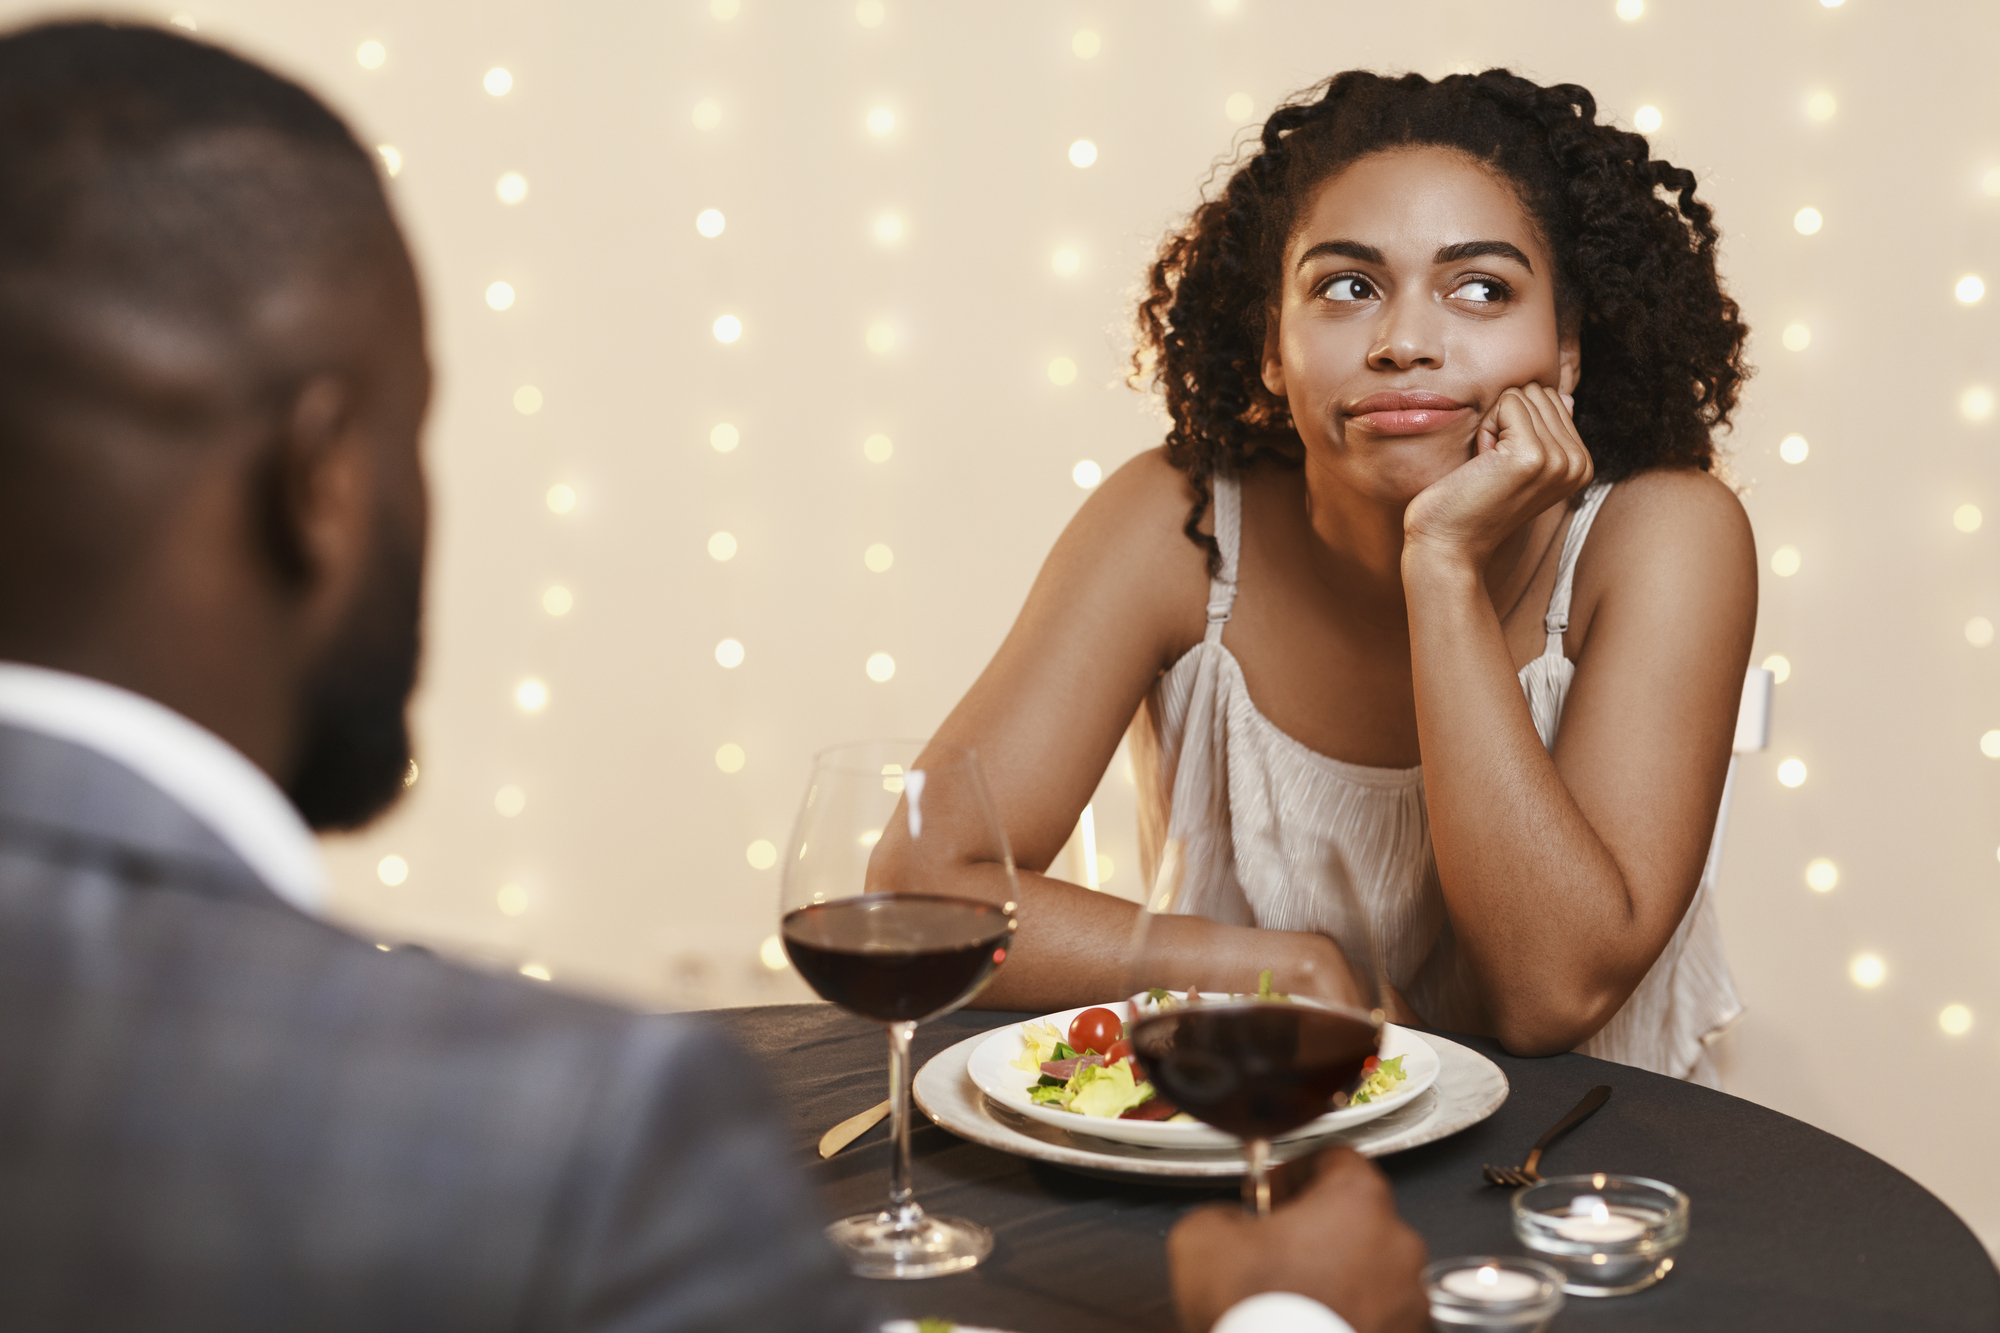 Do you feel emotionally distant or emotionally detached from your date?